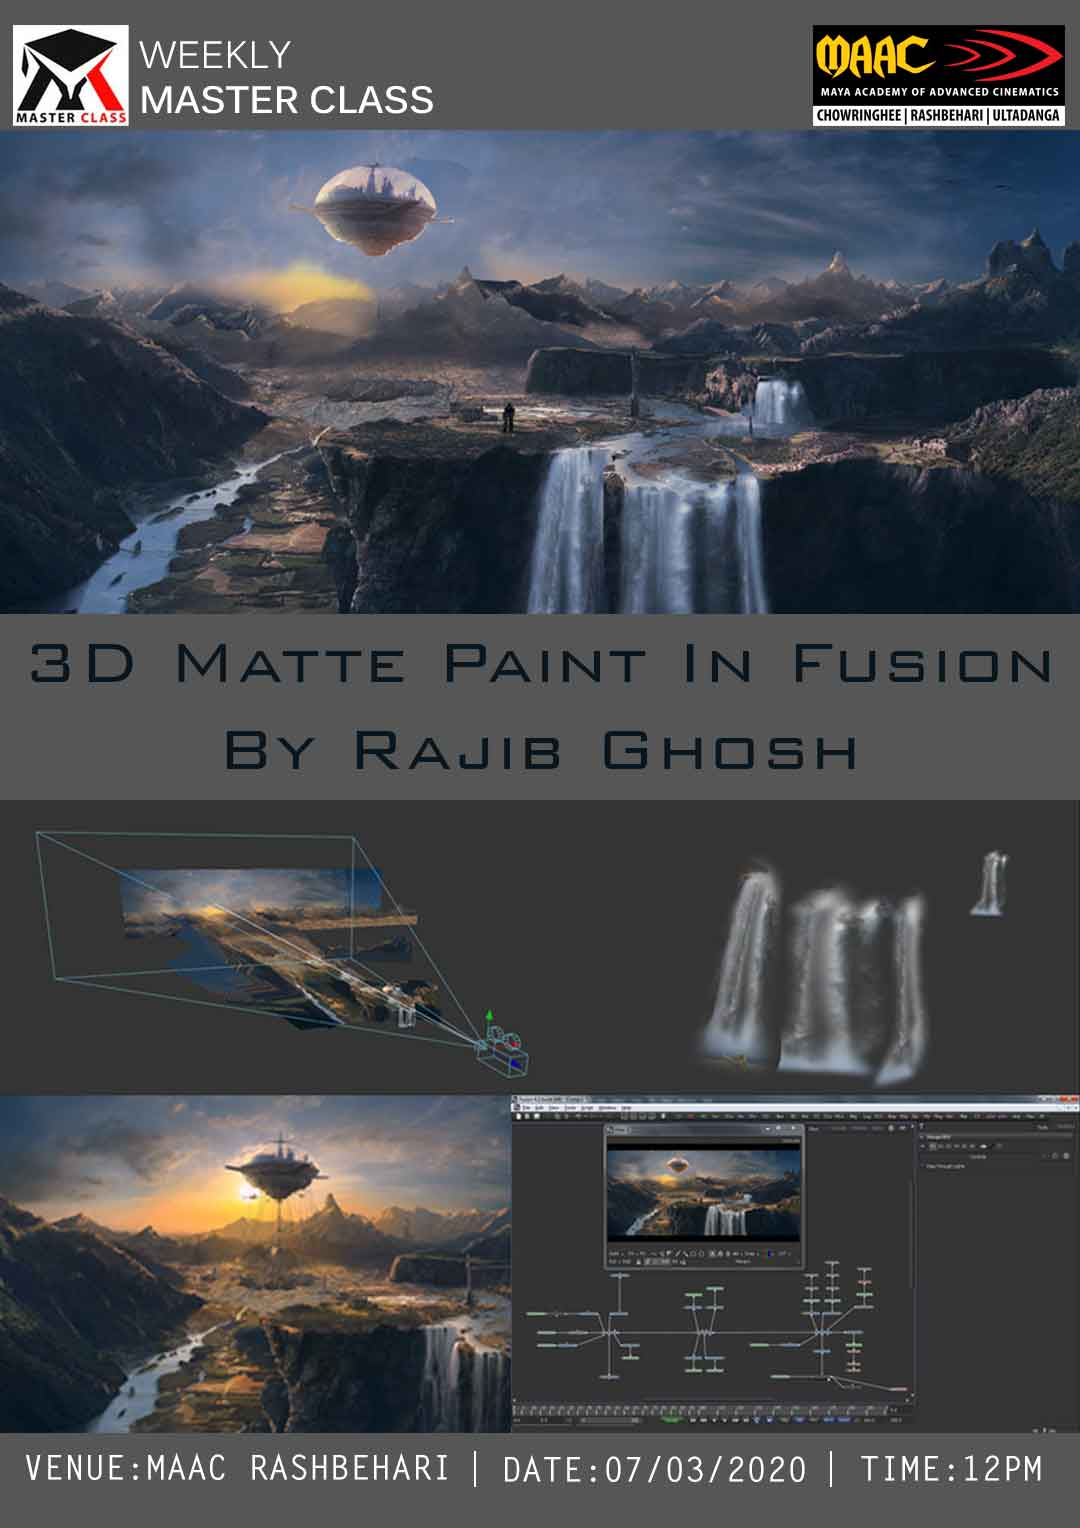 Weekly Master Class on 3D Matte Paint In Fusion